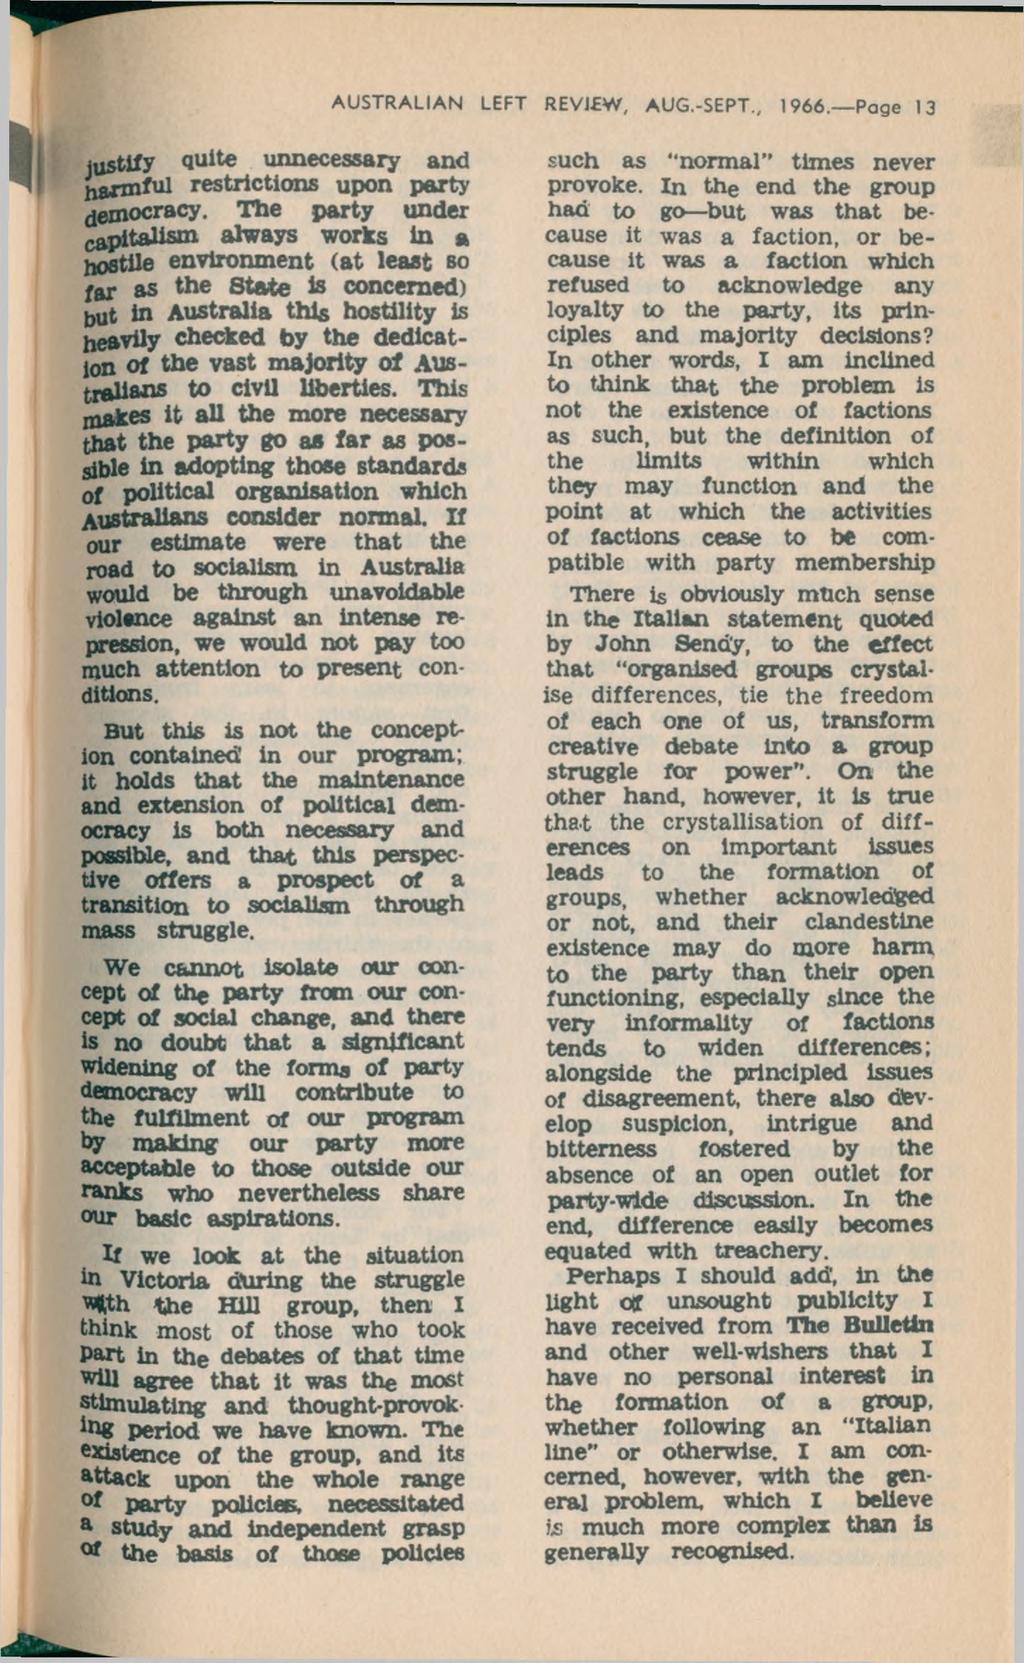 AU STRALIAN LEFT REVJfW, AUG.-SEPT., 1966. Page 13 justify unnecessary and harmful restrictions upon party democracy.